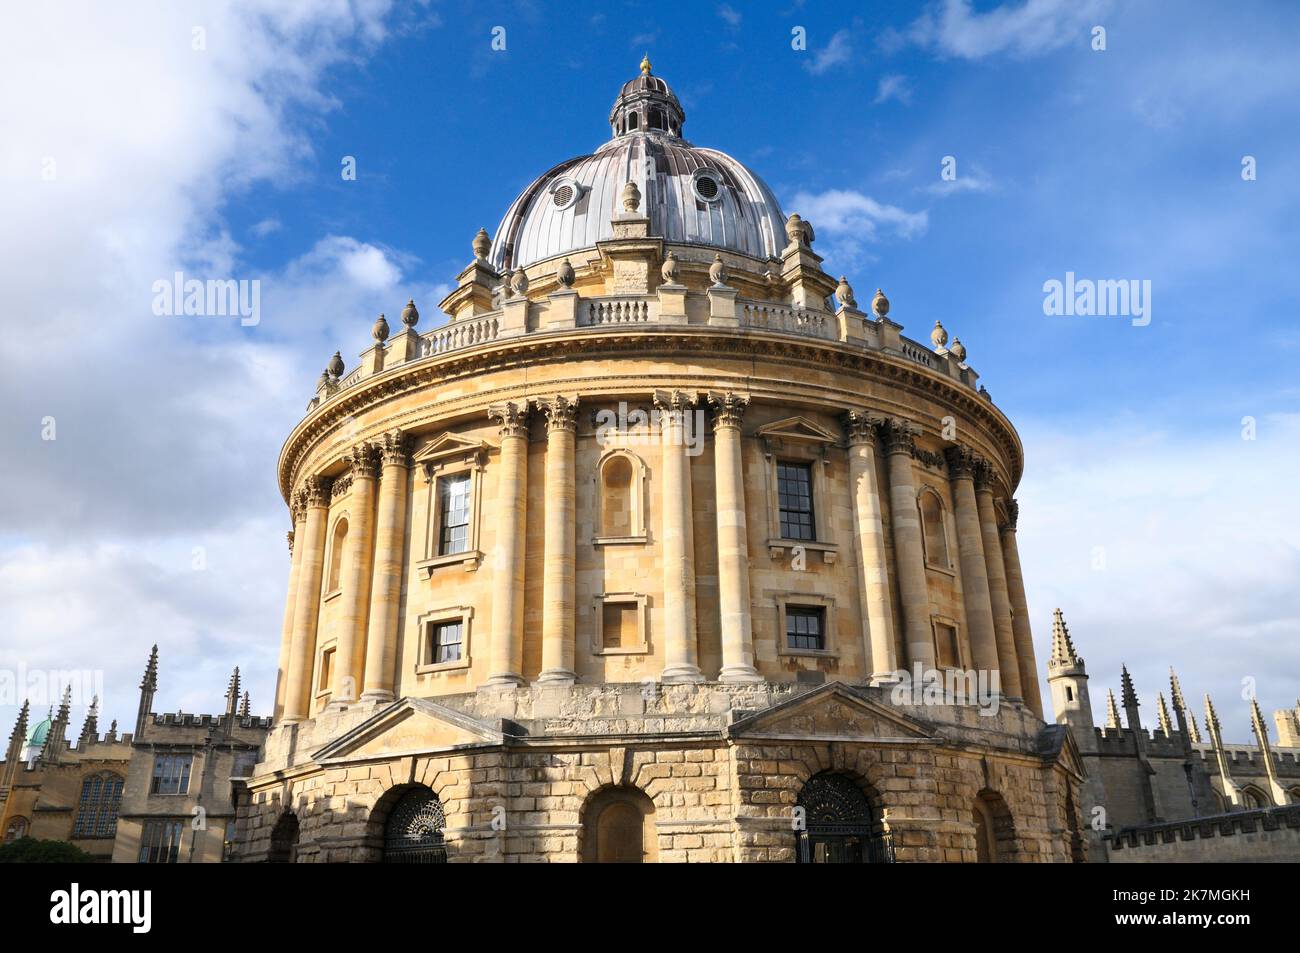 Radcliffe Camera, Bodleian Library, University of Oxford, England, UK.  Famous Grade I-listed building designed by renowned architect James Gibbs. Stock Photo